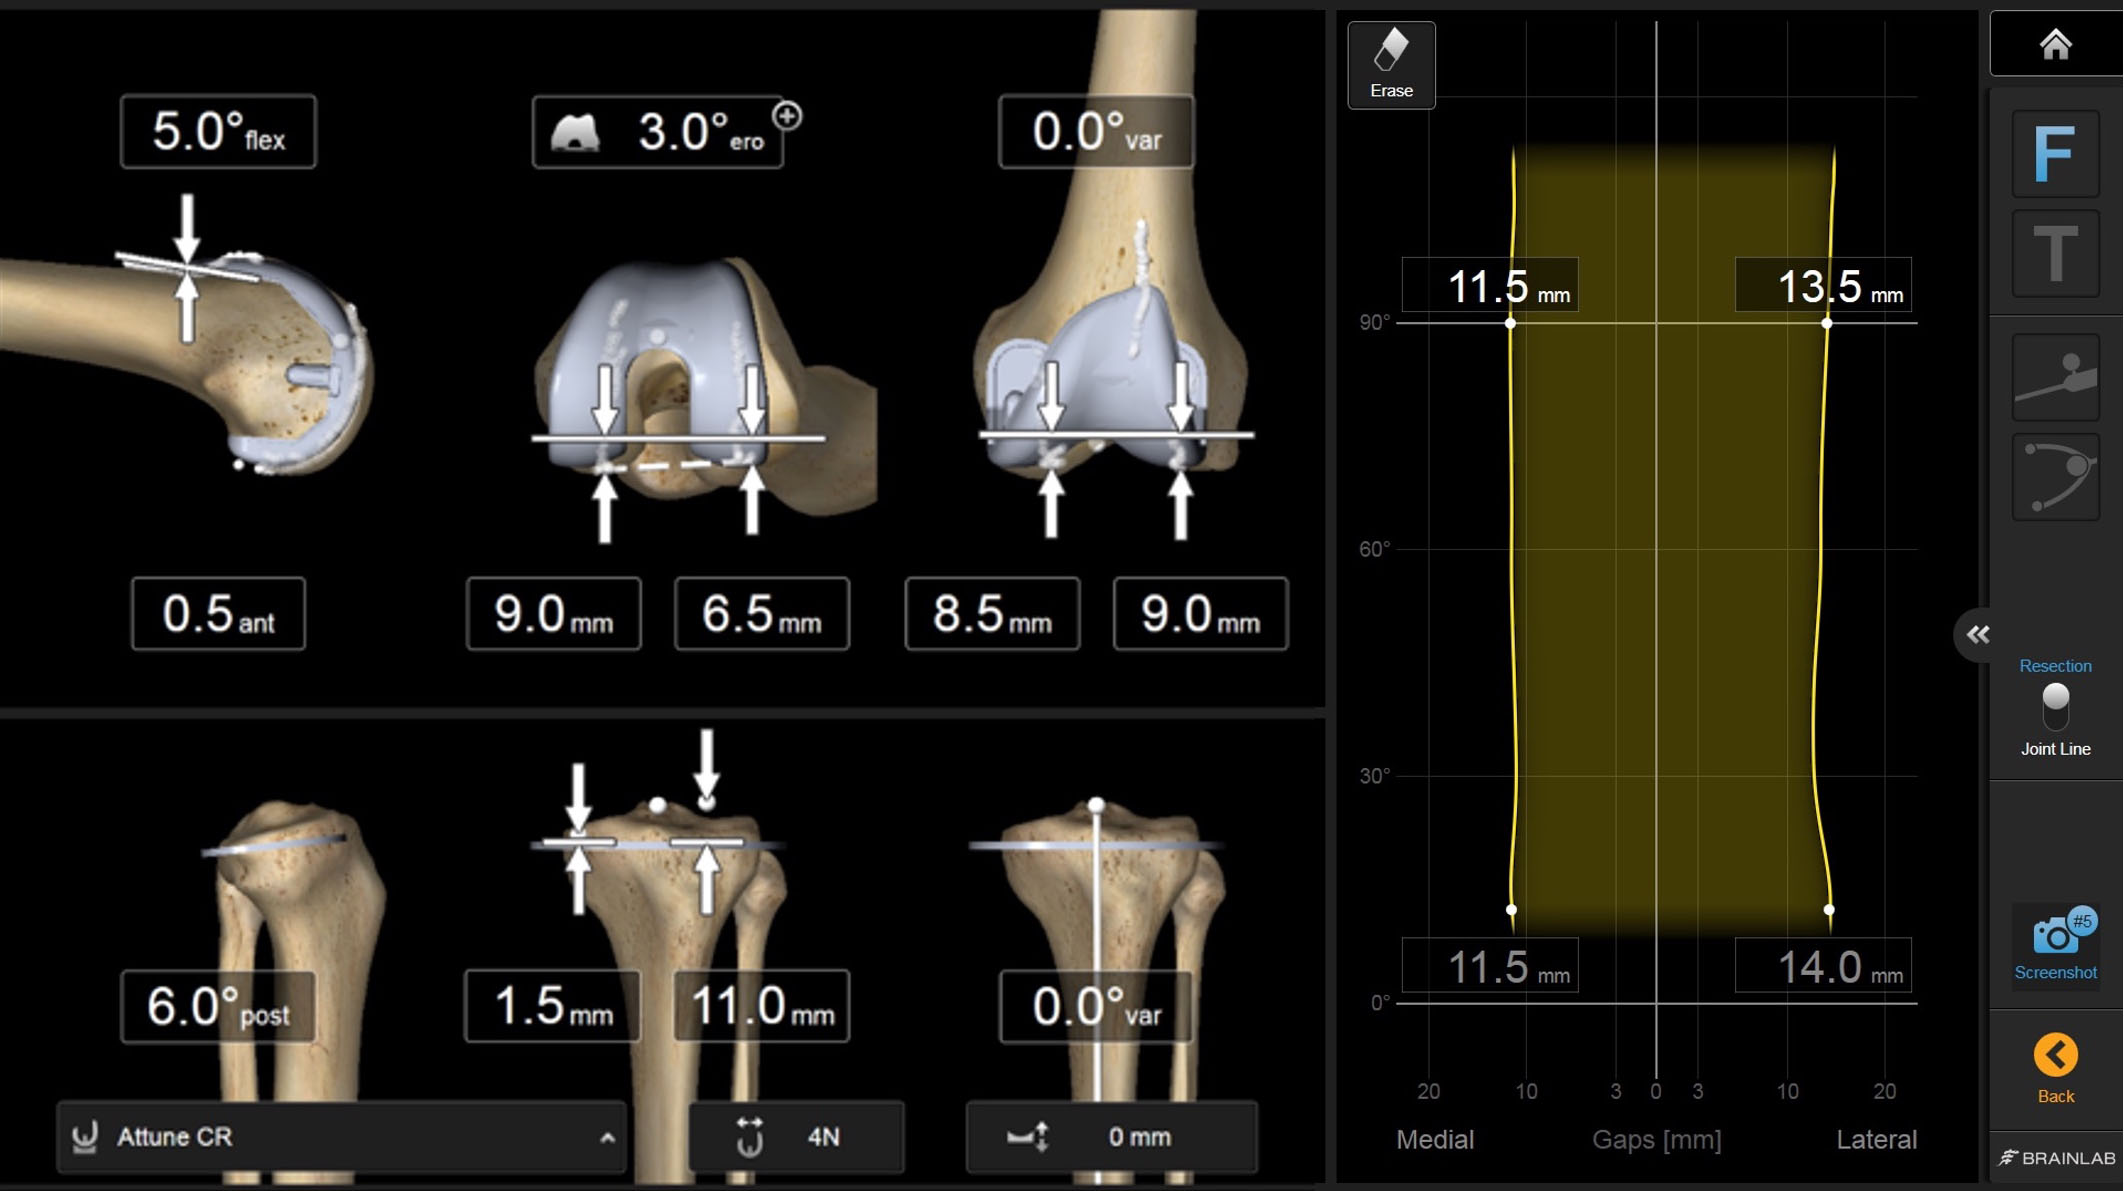 The right screen shows a graph of gaps from full knee extension to full flexion. The lateral gap is shown on the right side, and the medial gap is shown on the right side. The left screen shows the component alignments and estimated widths of bony resection.